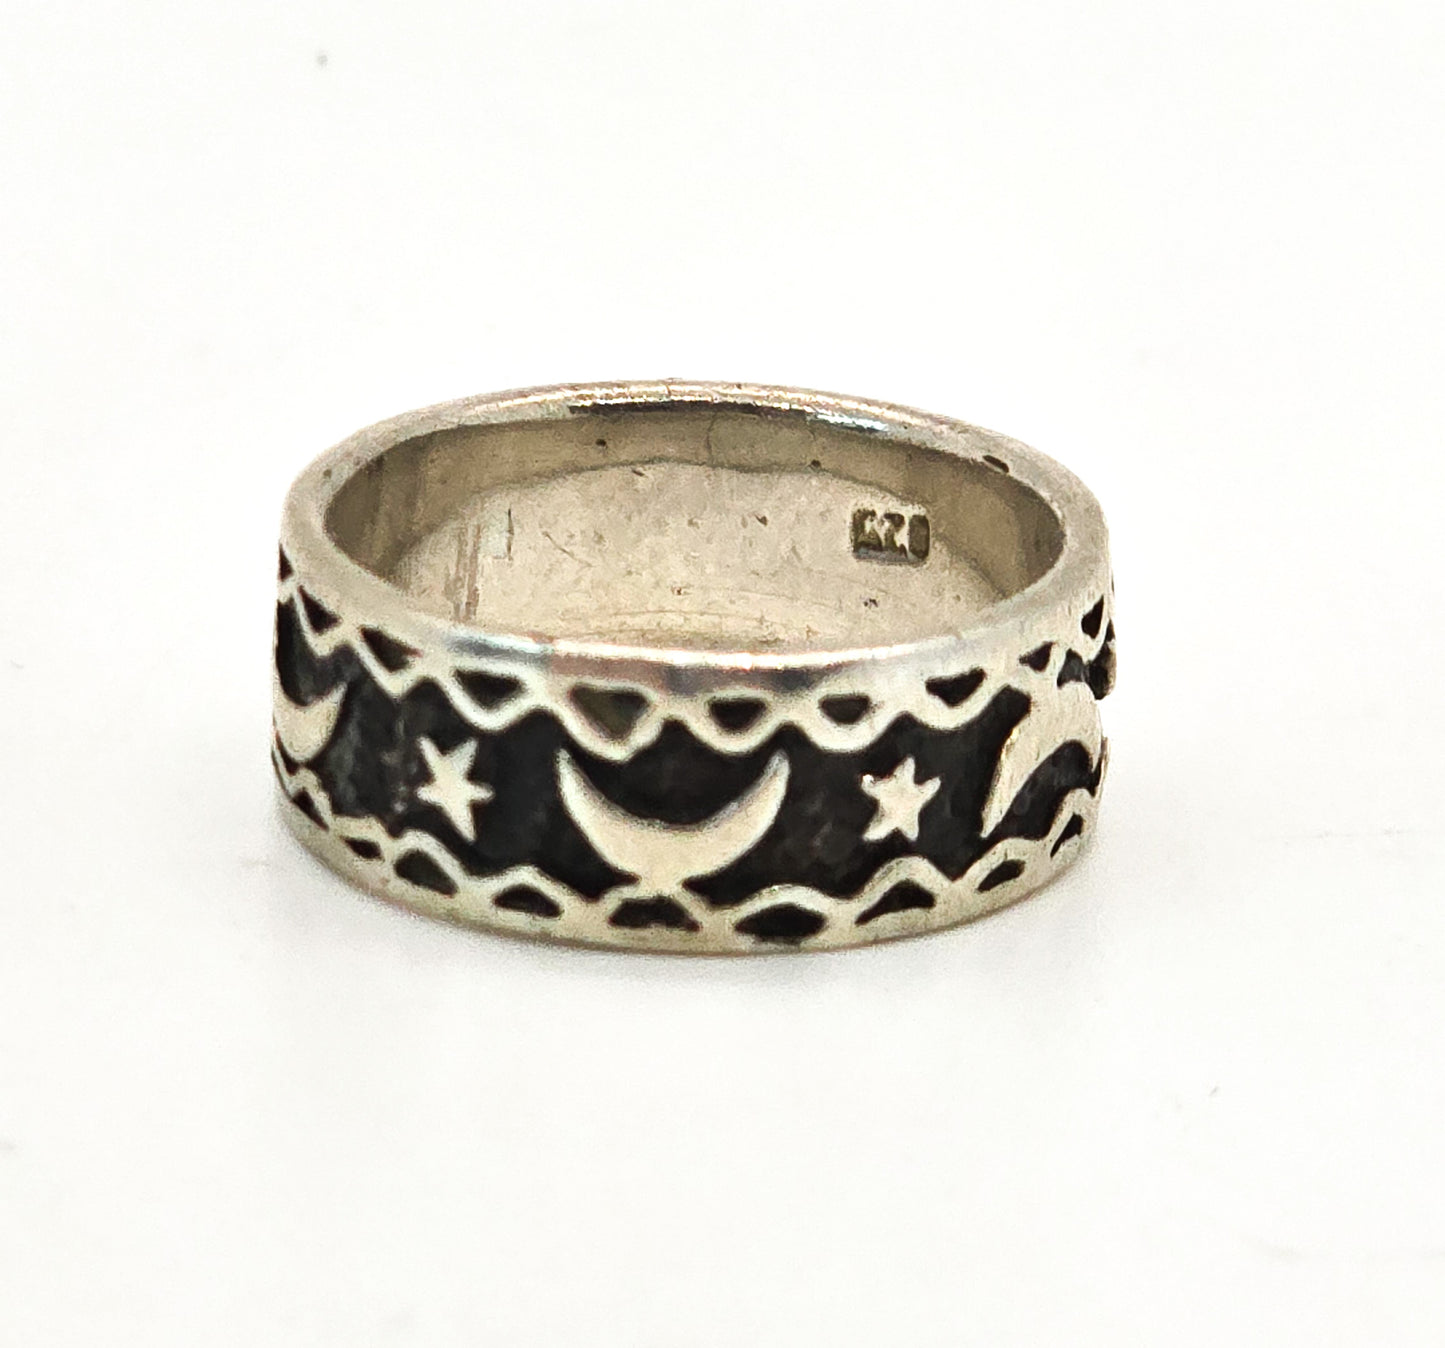 Celestial moon and stars thick sterling silver cigar band vintage ring size 5